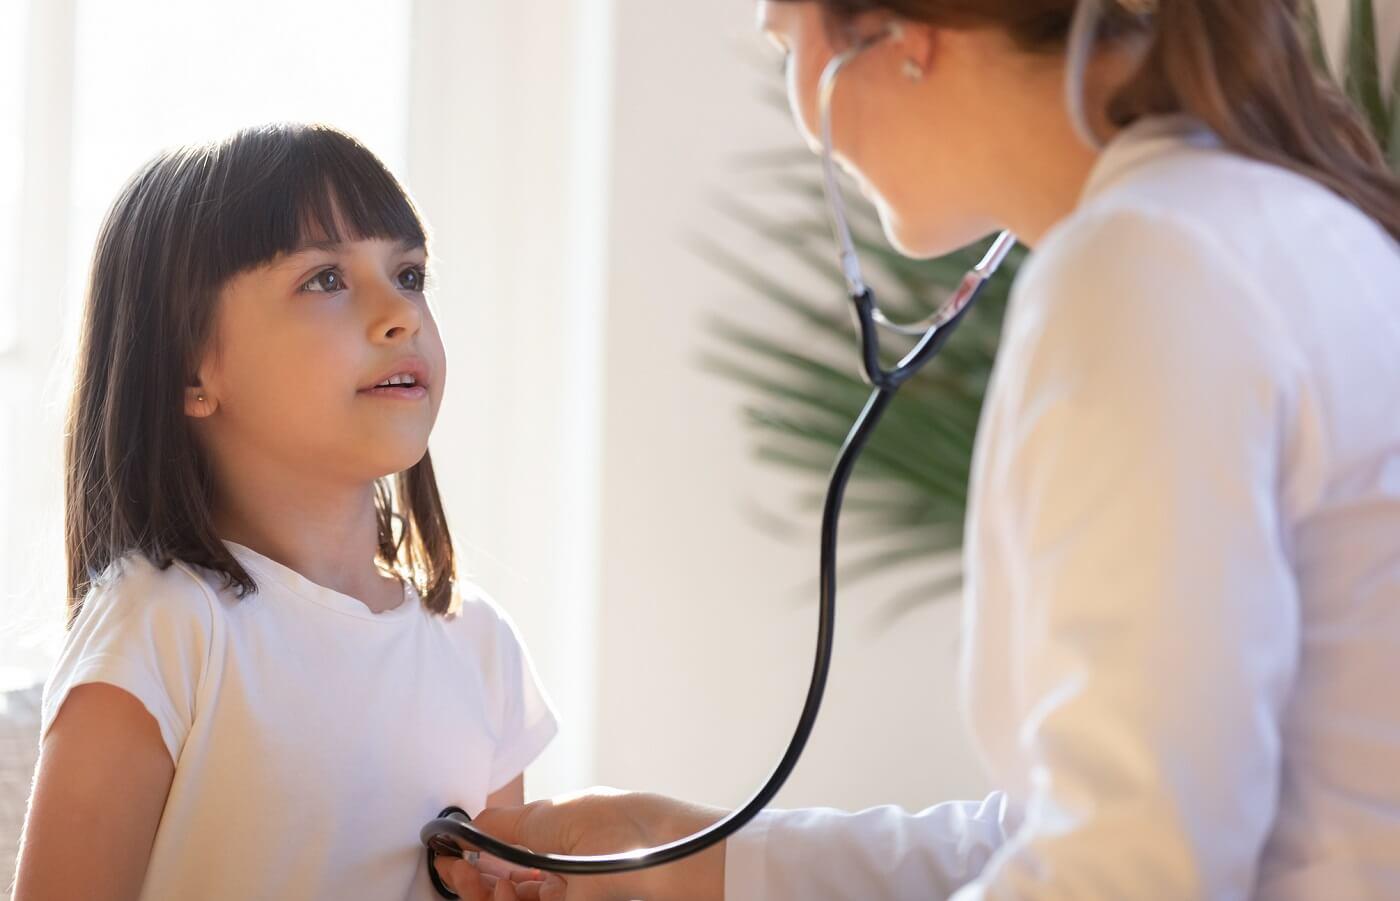 Photo of health care provider listening to child breathing with stethoscope.